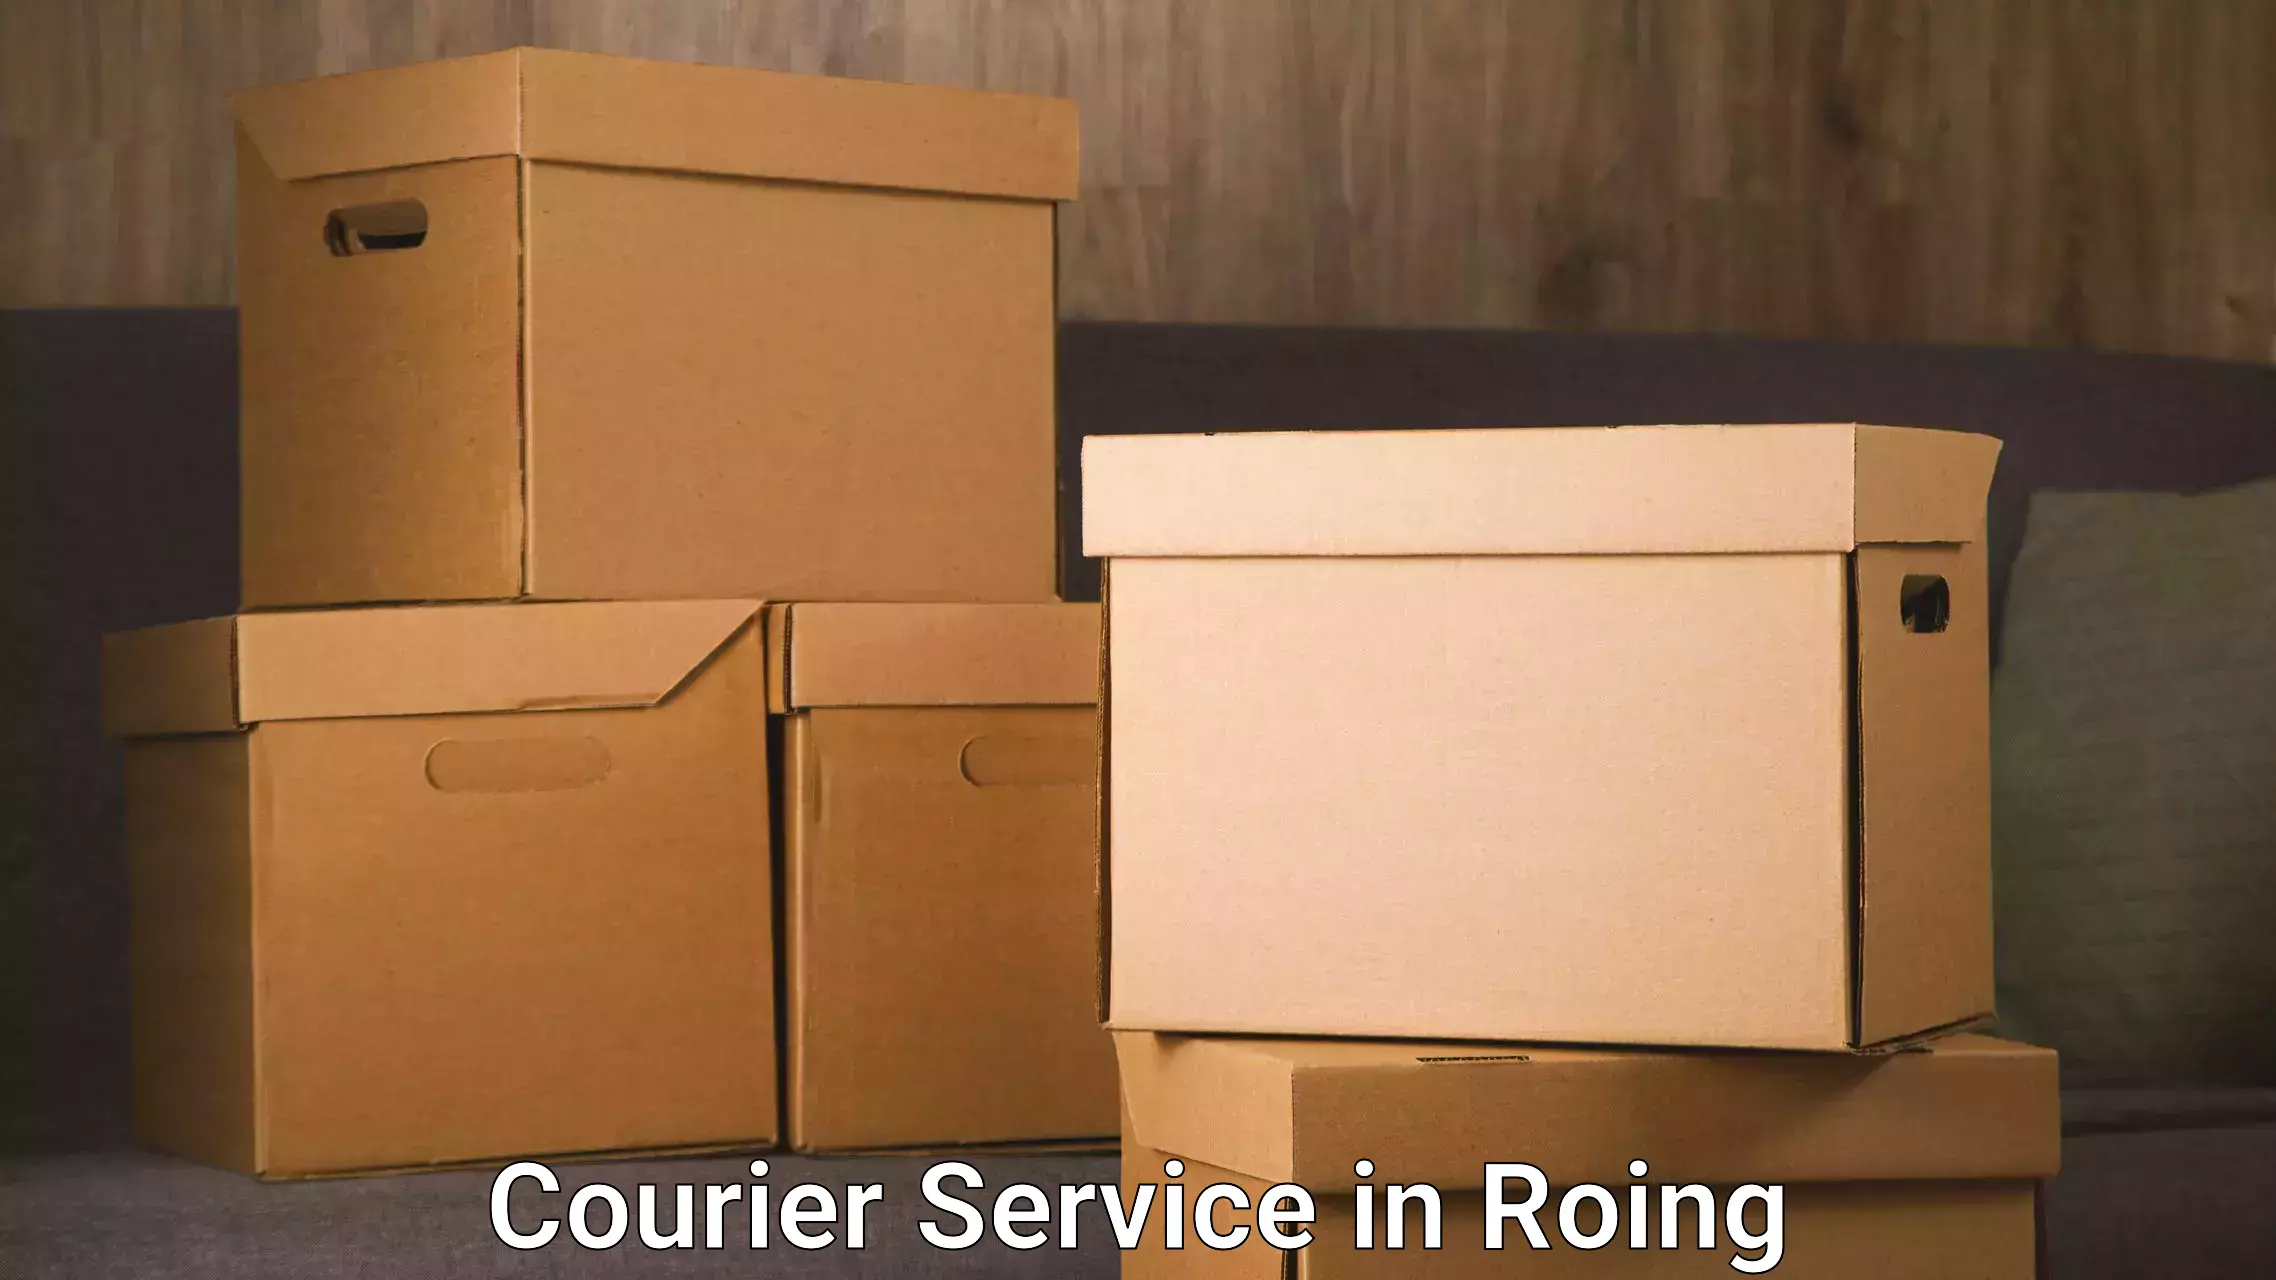 Courier service efficiency in Roing